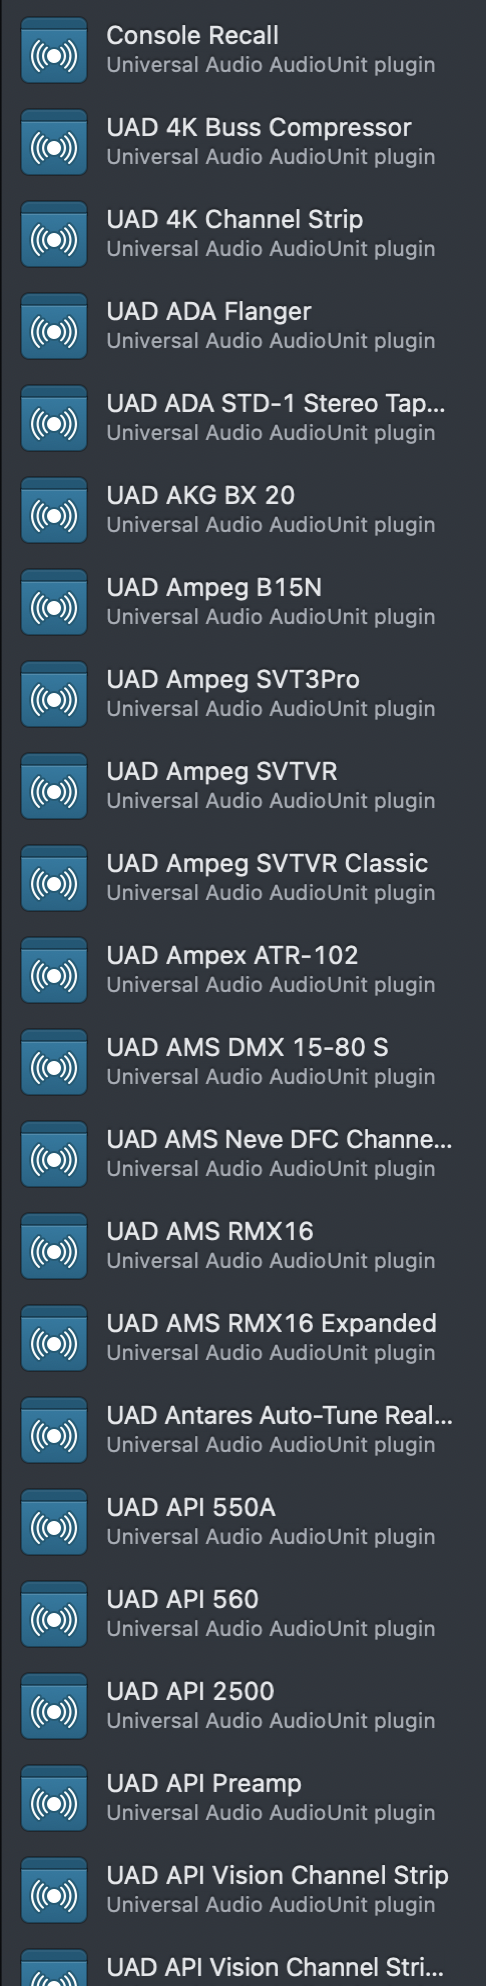 Hundreds of UAD Plugins I Do Not Own in My Way in Audio Hijack